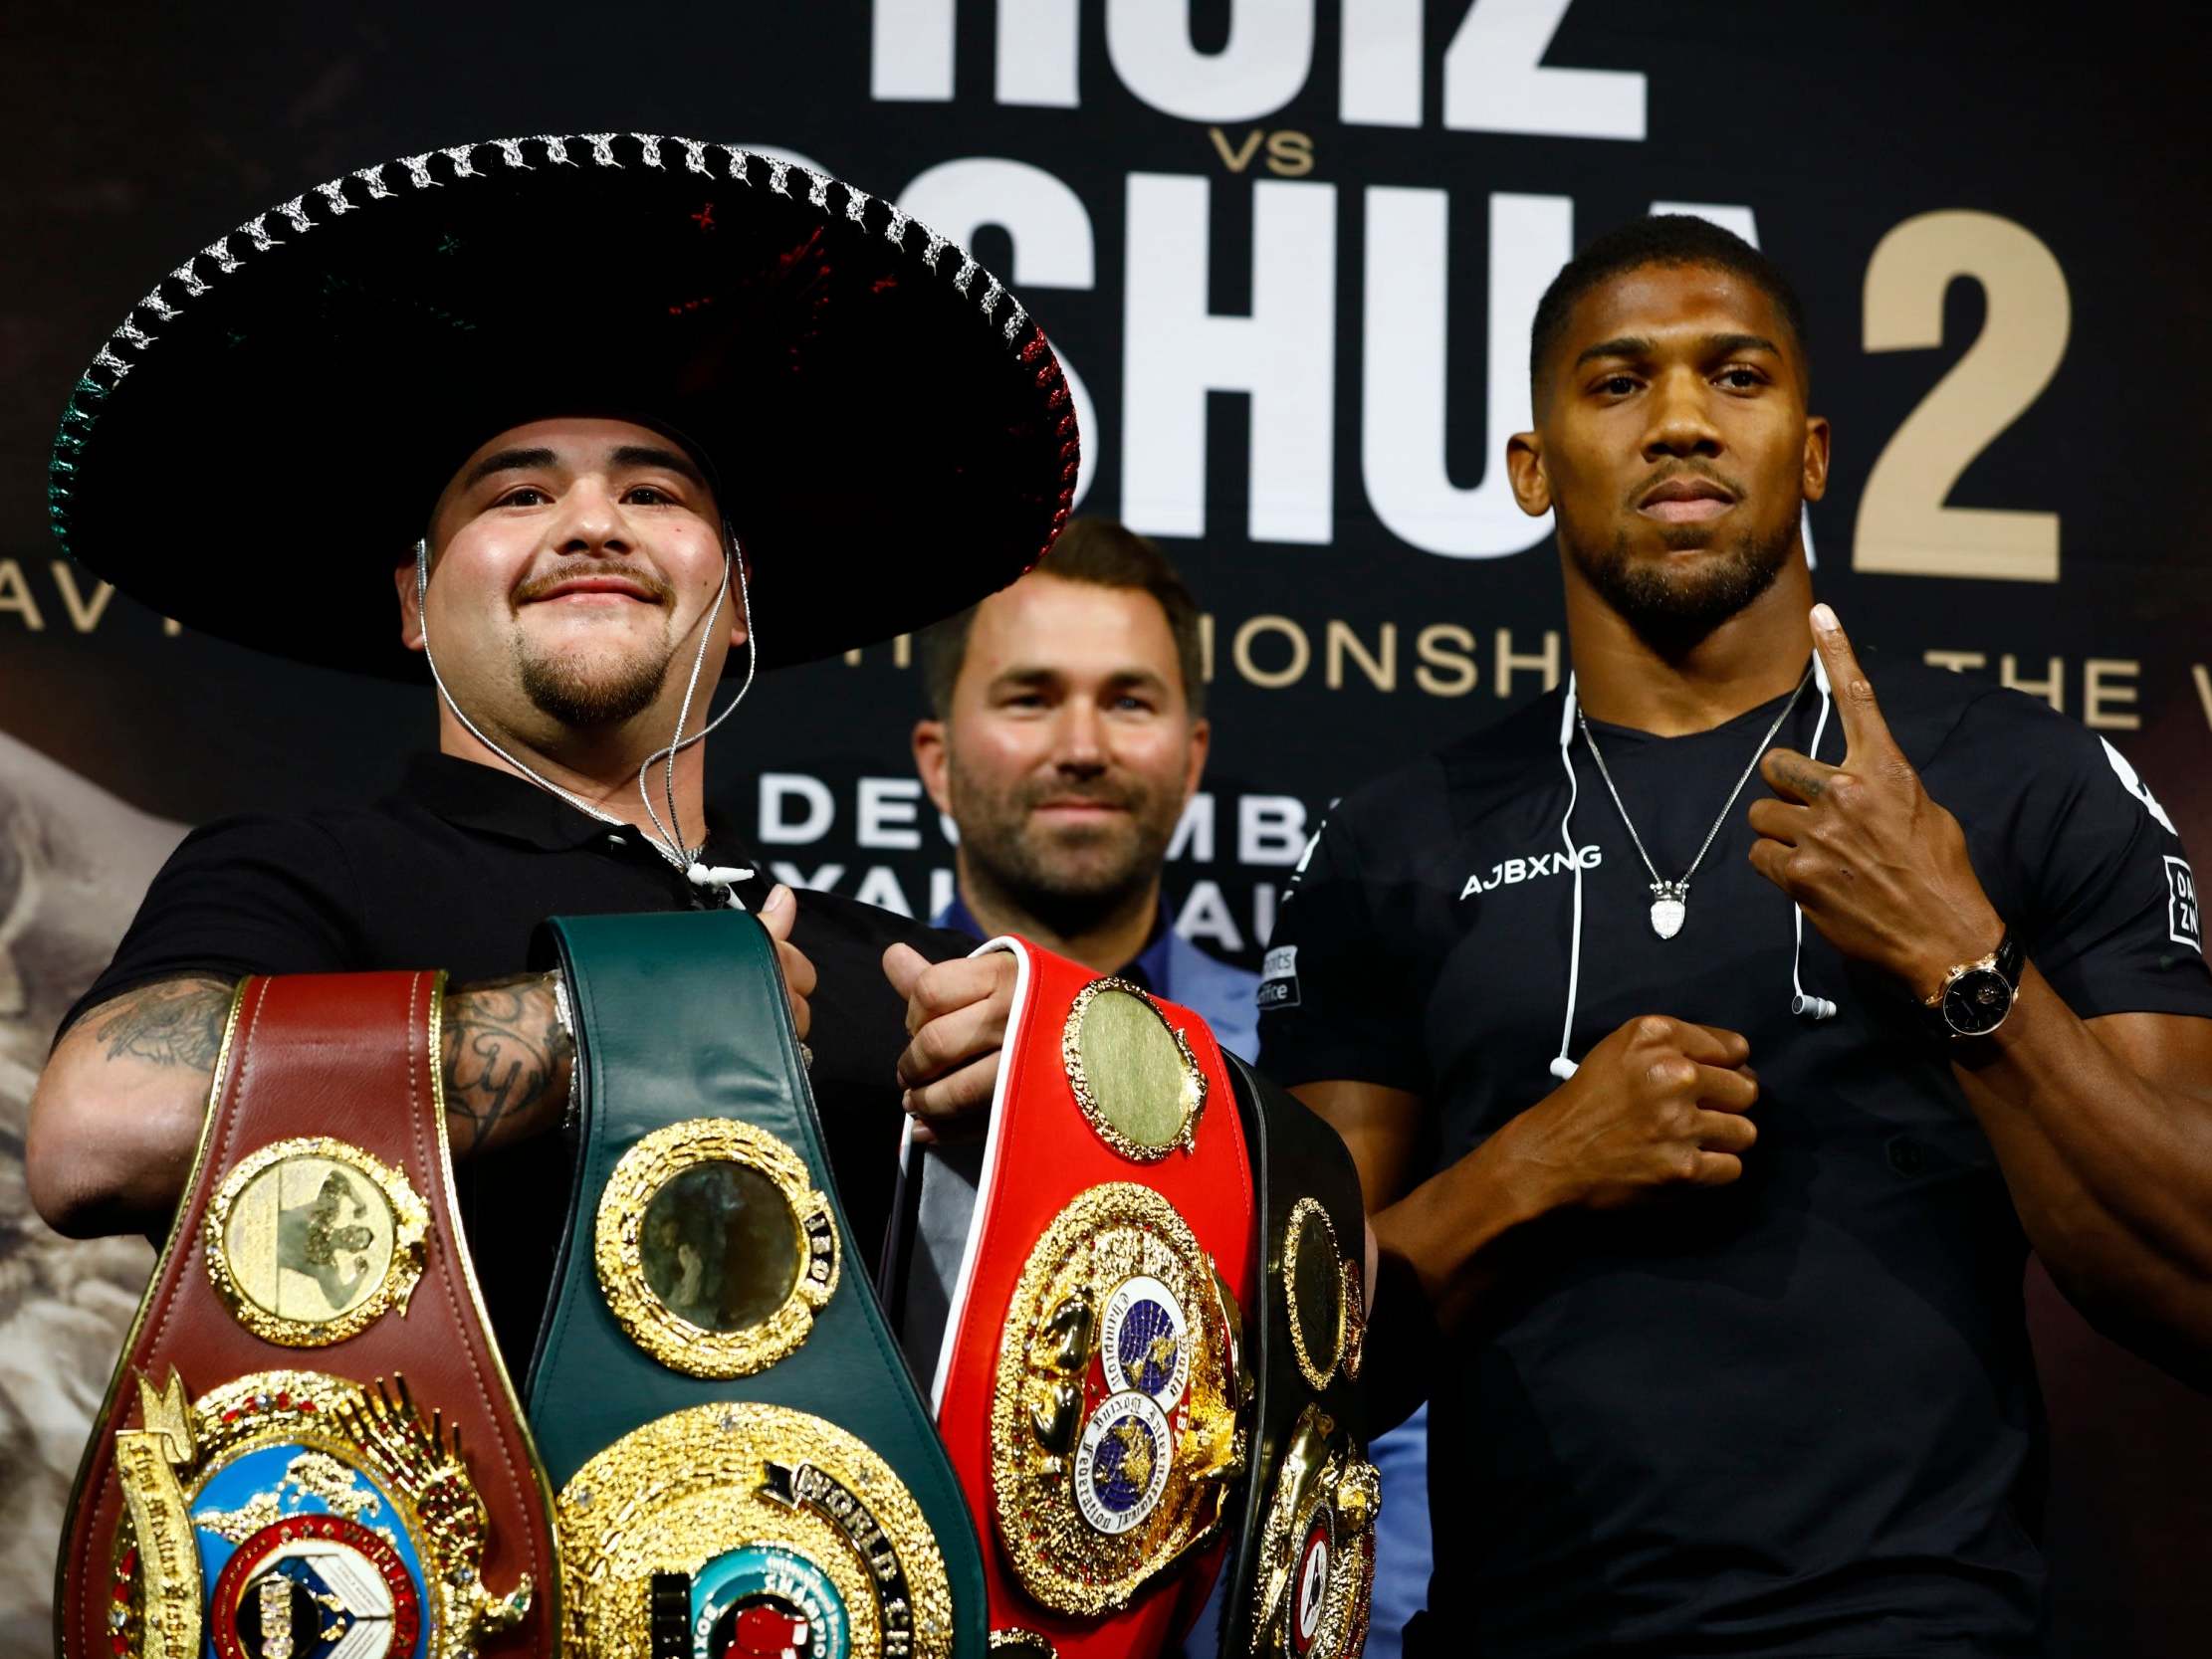 Andy Ruiz and Anthony Joshua at the London press conference earlier this month